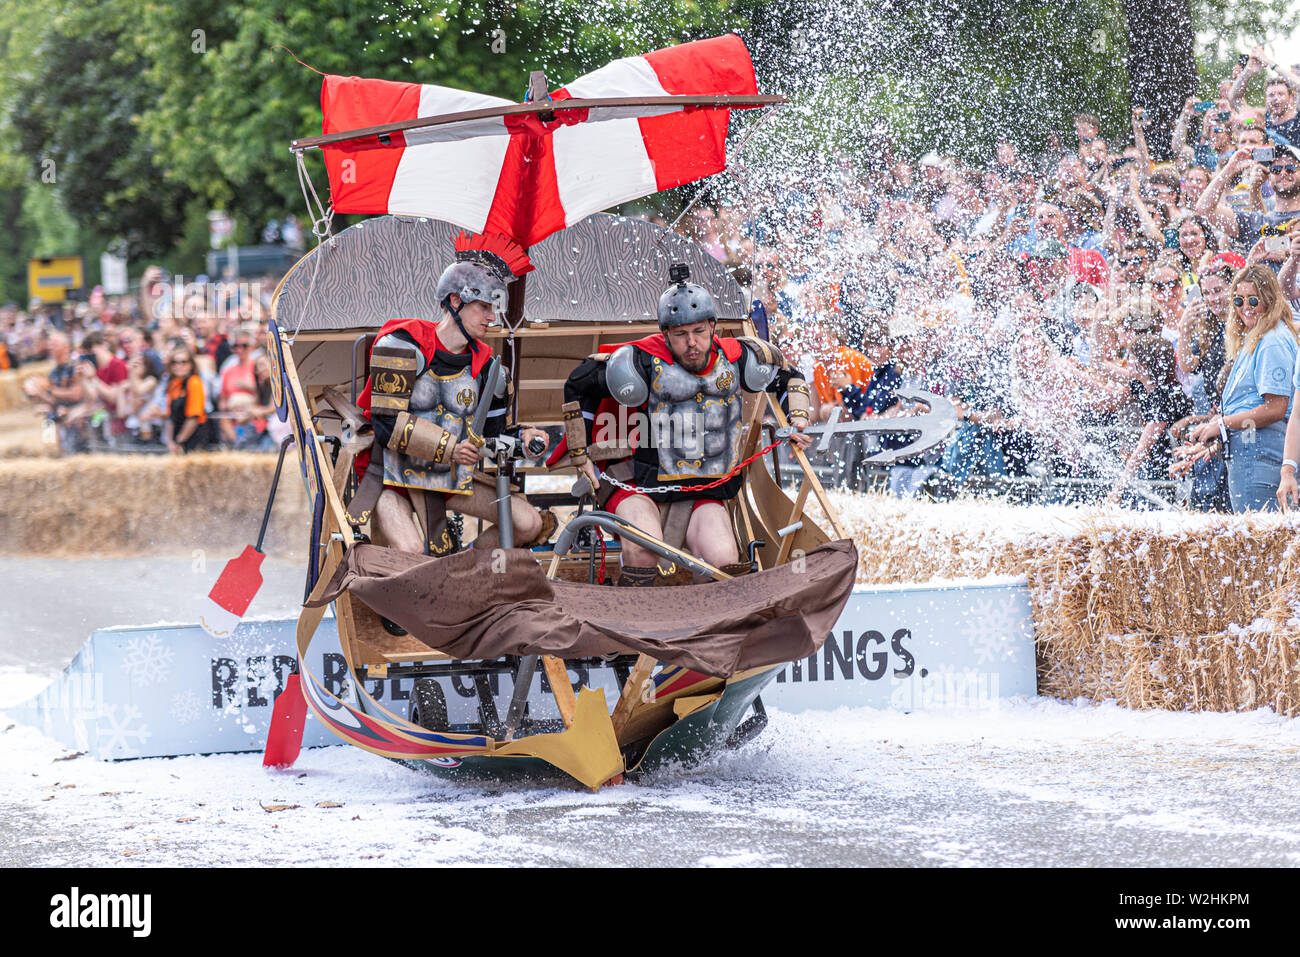 Emperor Barbus Bacterius and the Nautilus competing in the Red Bull Soapbox Race 2019 at Alexandra Park, London, UK. Jumping over ramp with people Stock Photo